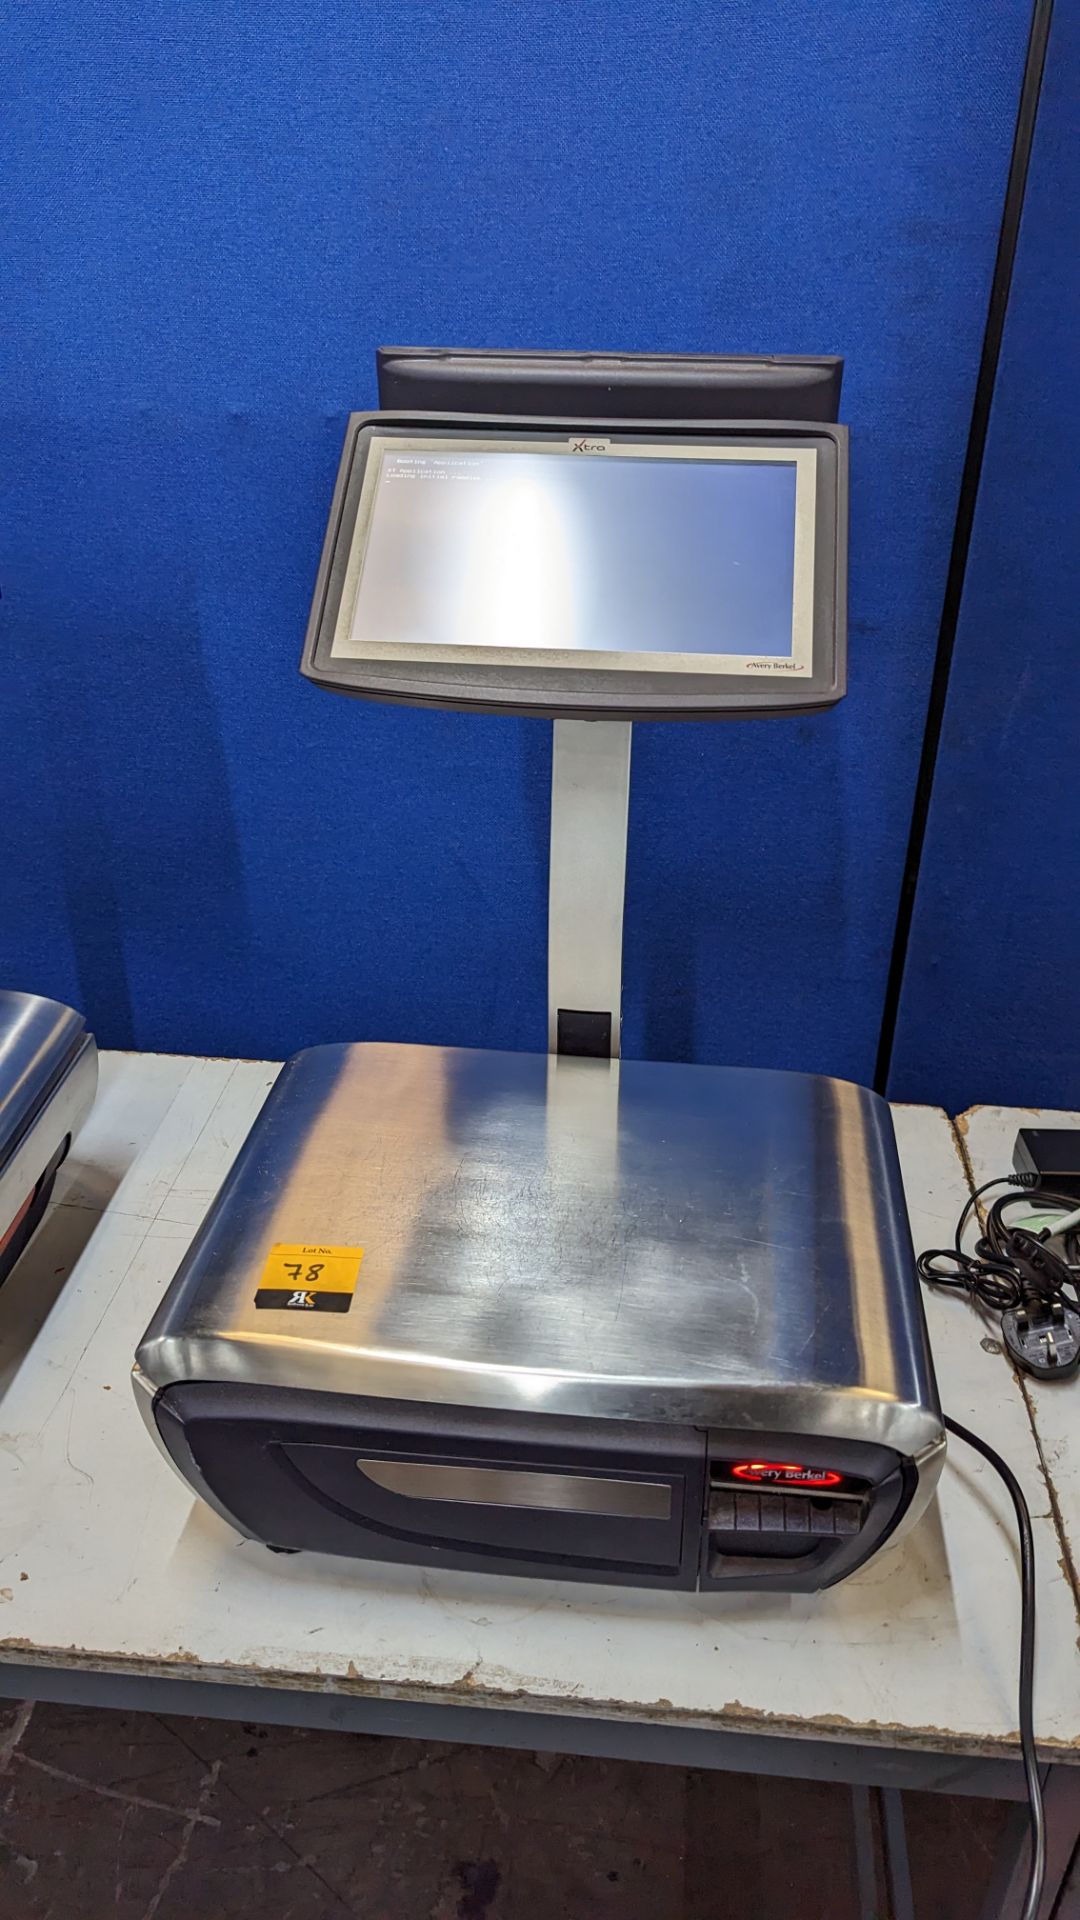 Avery Berkel Xti 400 Label & Receipt printing scale, 6kg/15kg capacity. These scales include a 10" - Image 2 of 16